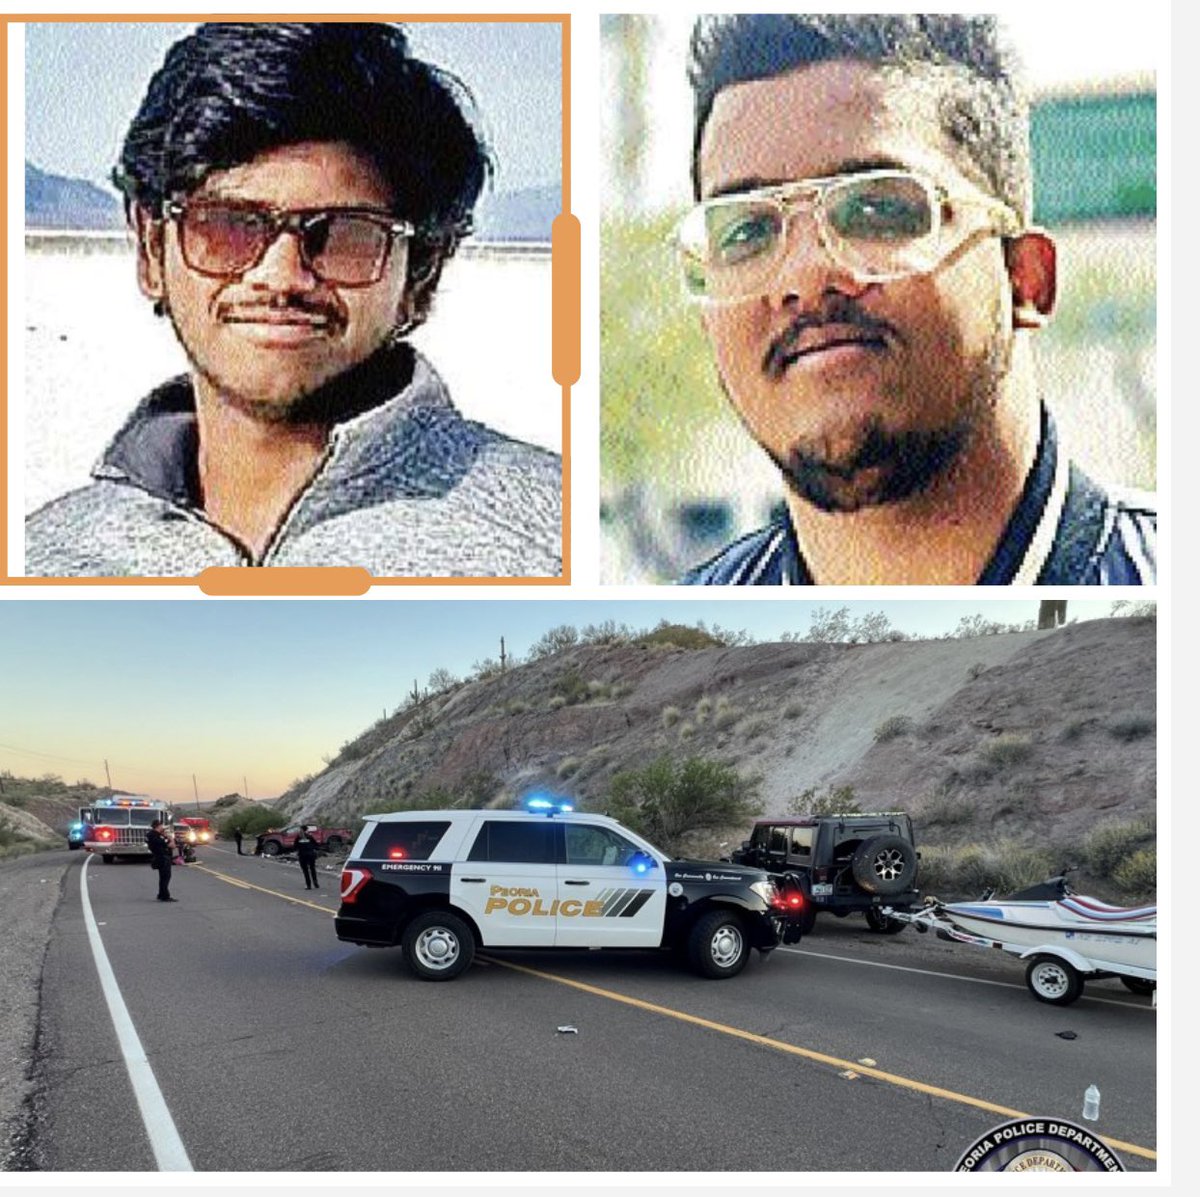 Two Indian Students Die in US Tragic Road Accident Claims Lives Two young students from Telangana, India, met with a tragic end in a road accident in the United States. Mukka Nivesh, aged 20, from Karimnagar, and Goutham Kumar, 19, from Station Ghanpur, passed away on Saturday